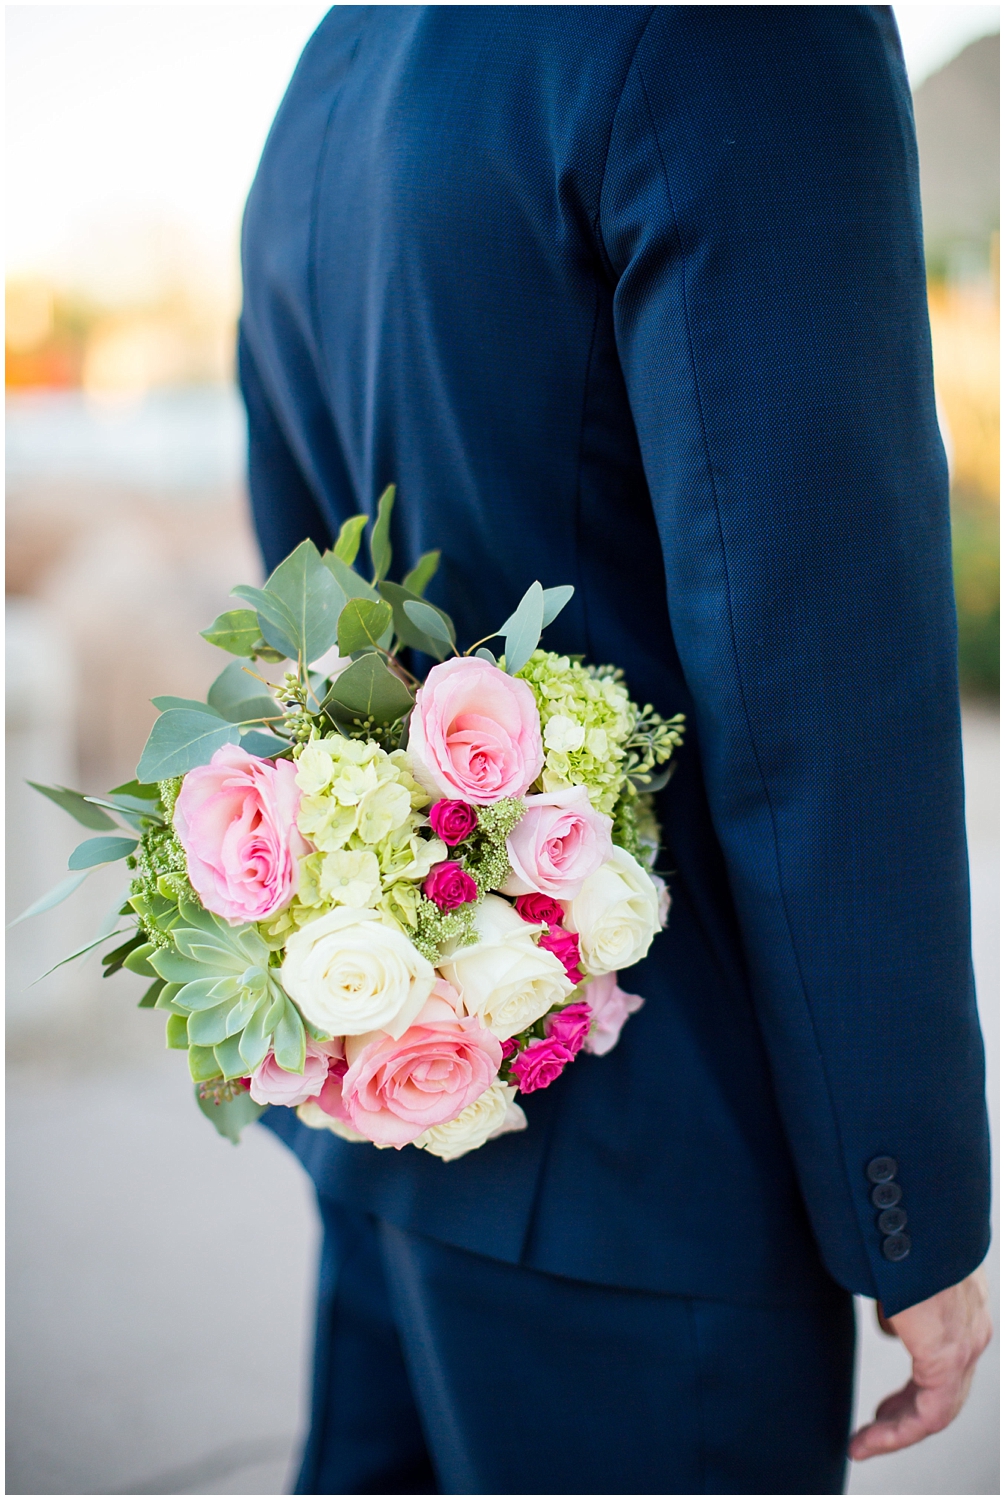 bride in essence design wedding dress holding a pink and white rose bouquet with green and groom in navy blue suit wedding portrait